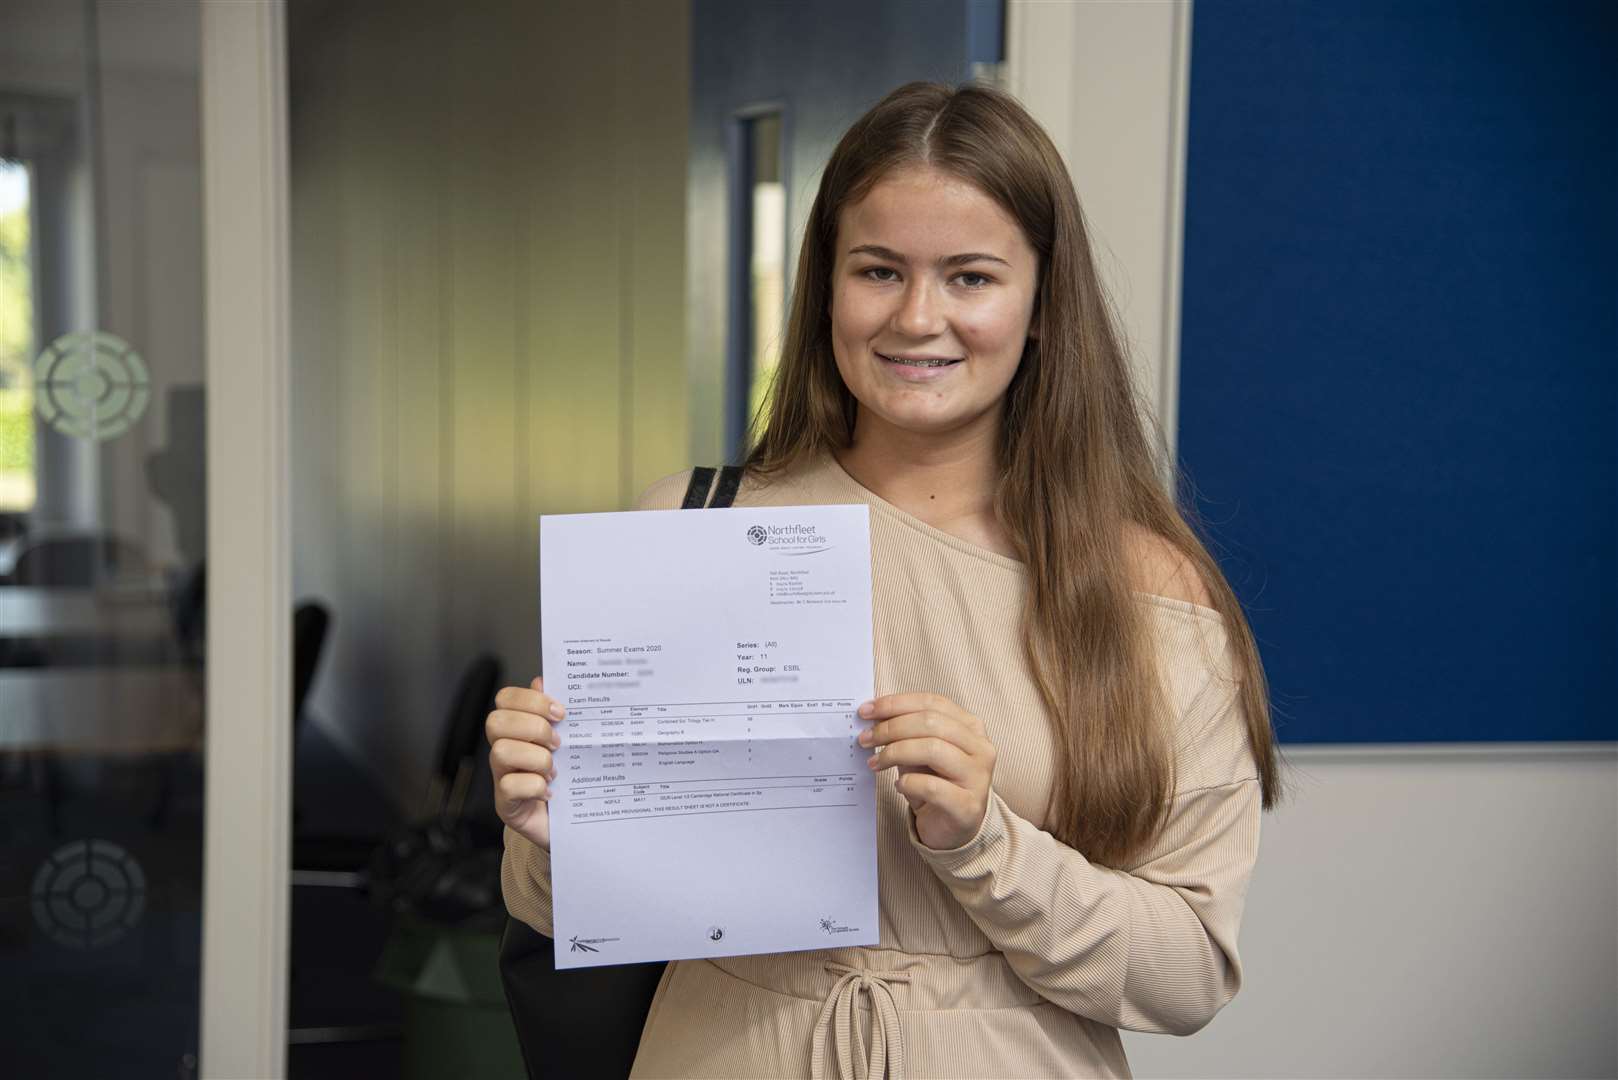 Danielle Brooks proudly shows her results at Northfleet School for Girls